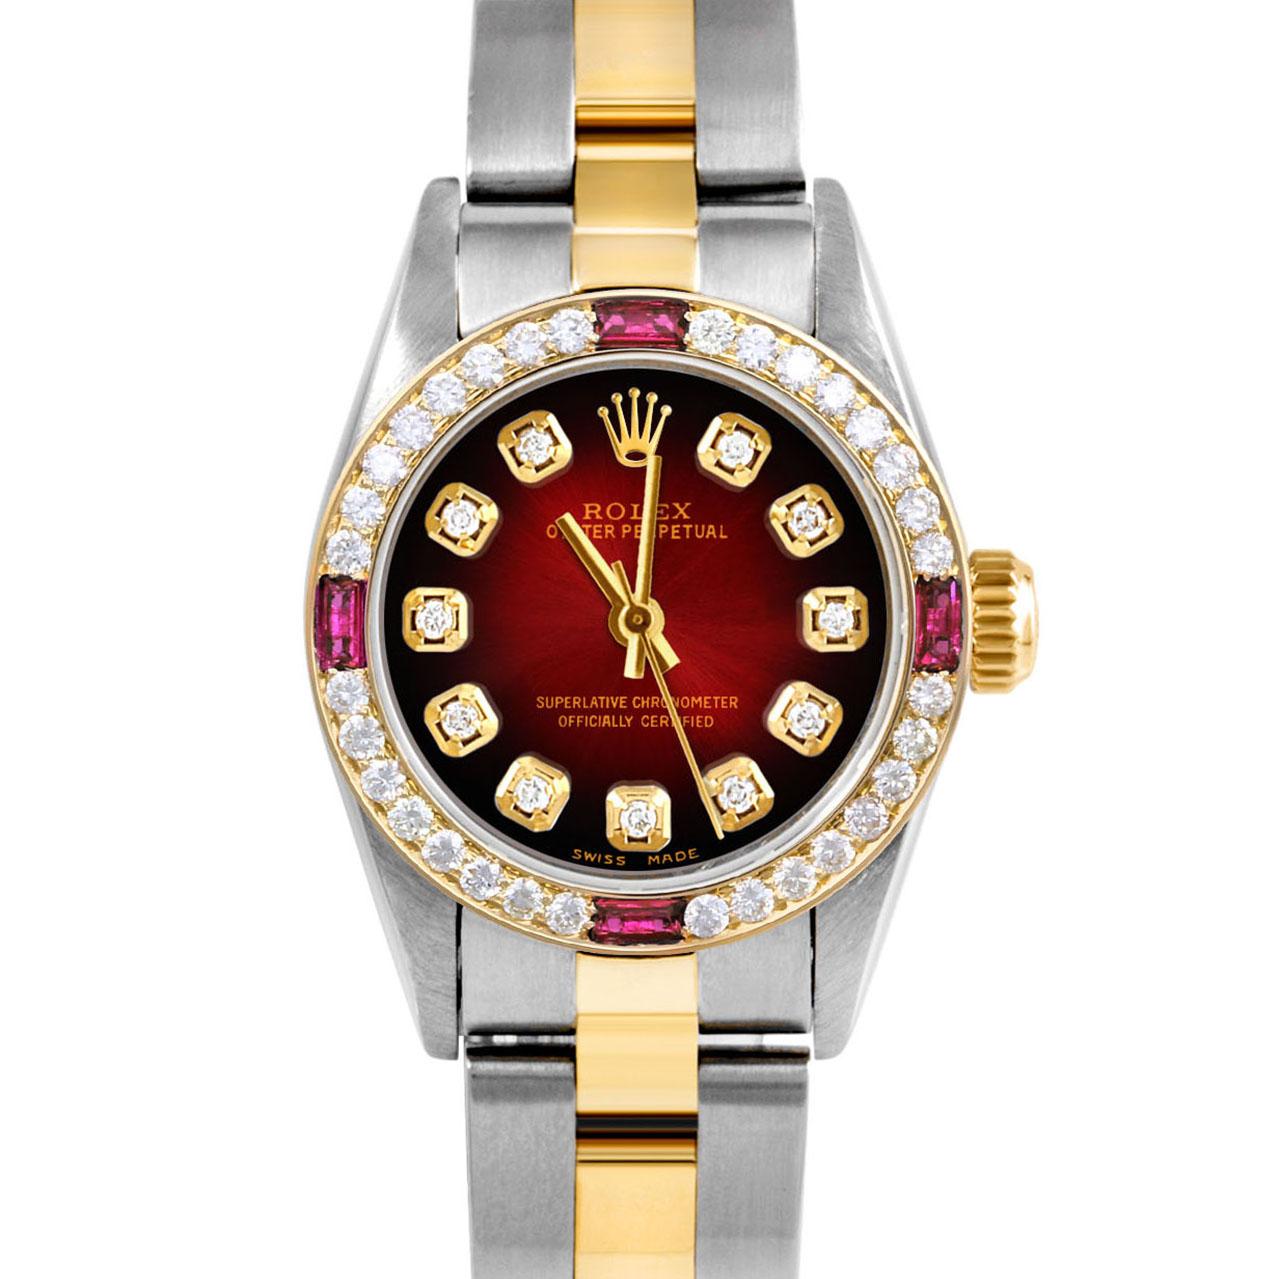 Brand : Rolex
Model : Oyster Perpetual 
Gender : Ladies
Metals : 14K Yellow Gold / Stainless Steel
Case Size : 24 mm

Dial : Custom Red Vignette Diamond Dial (This dial is not original Rolex And has been added aftermarket yet is a beautiful Custom